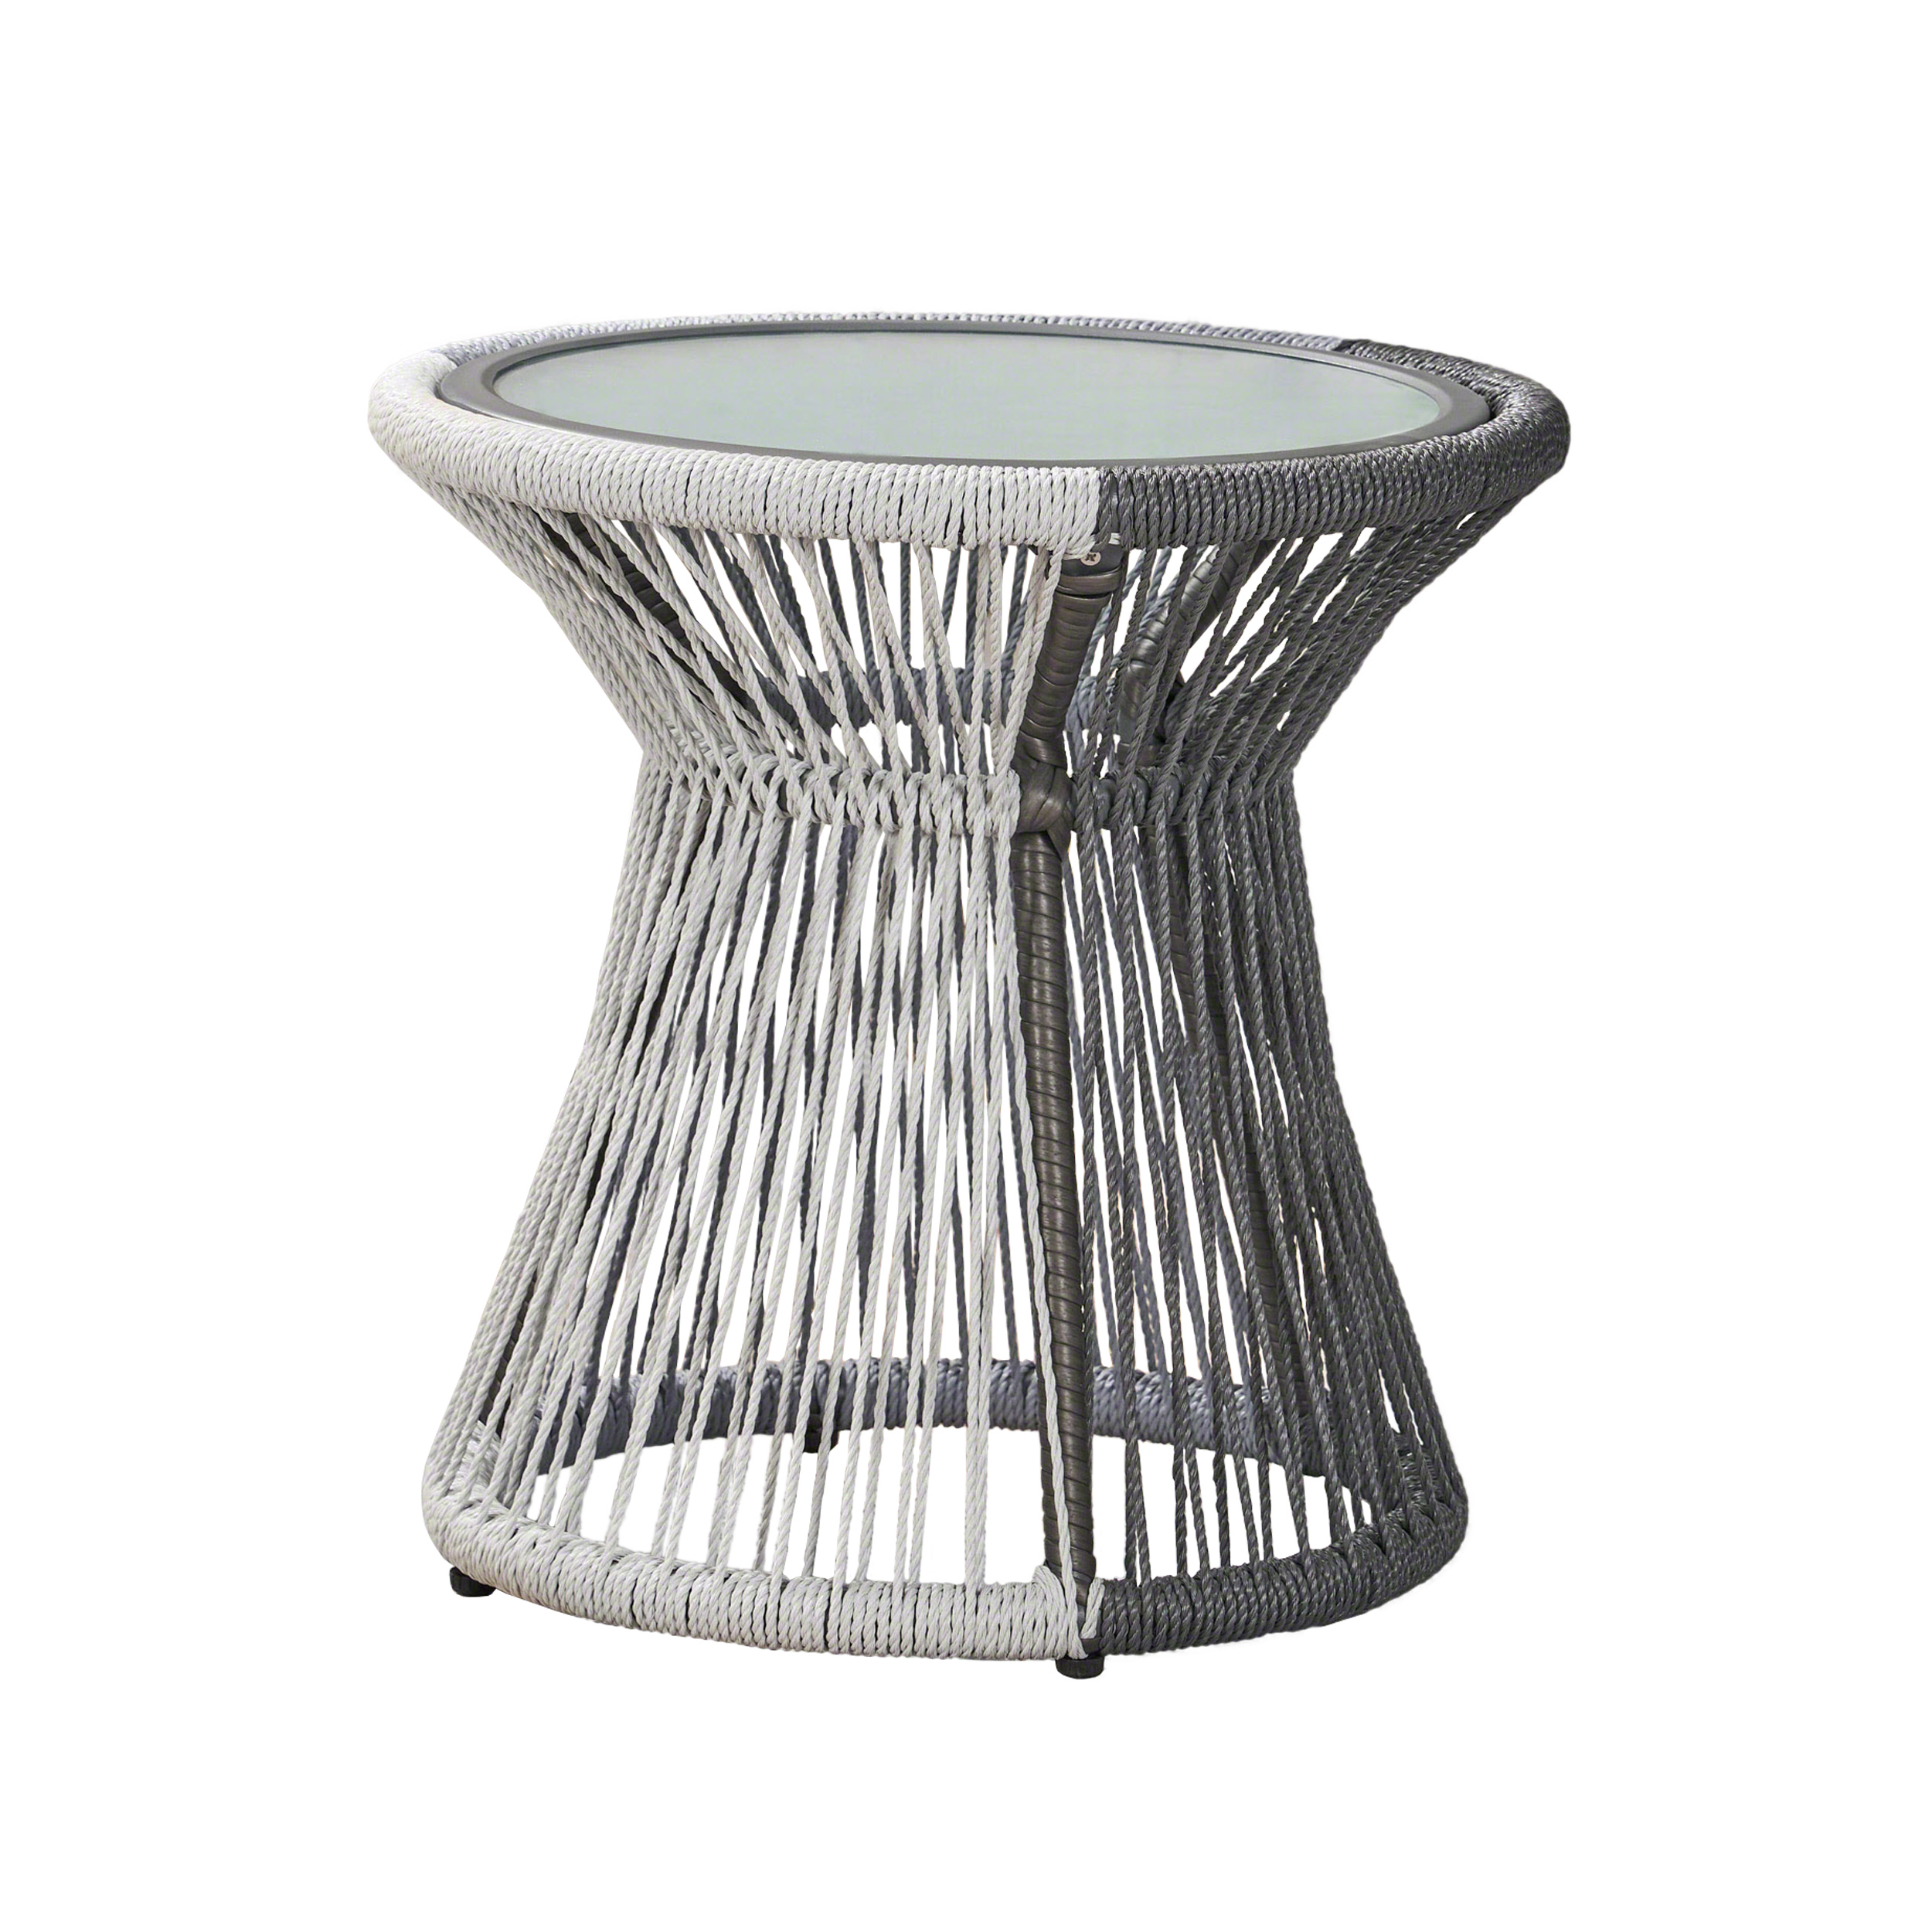 Elian Outdoor Rope Woven Side Table with Tempered Glass Top, Gray, White - image 5 of 5